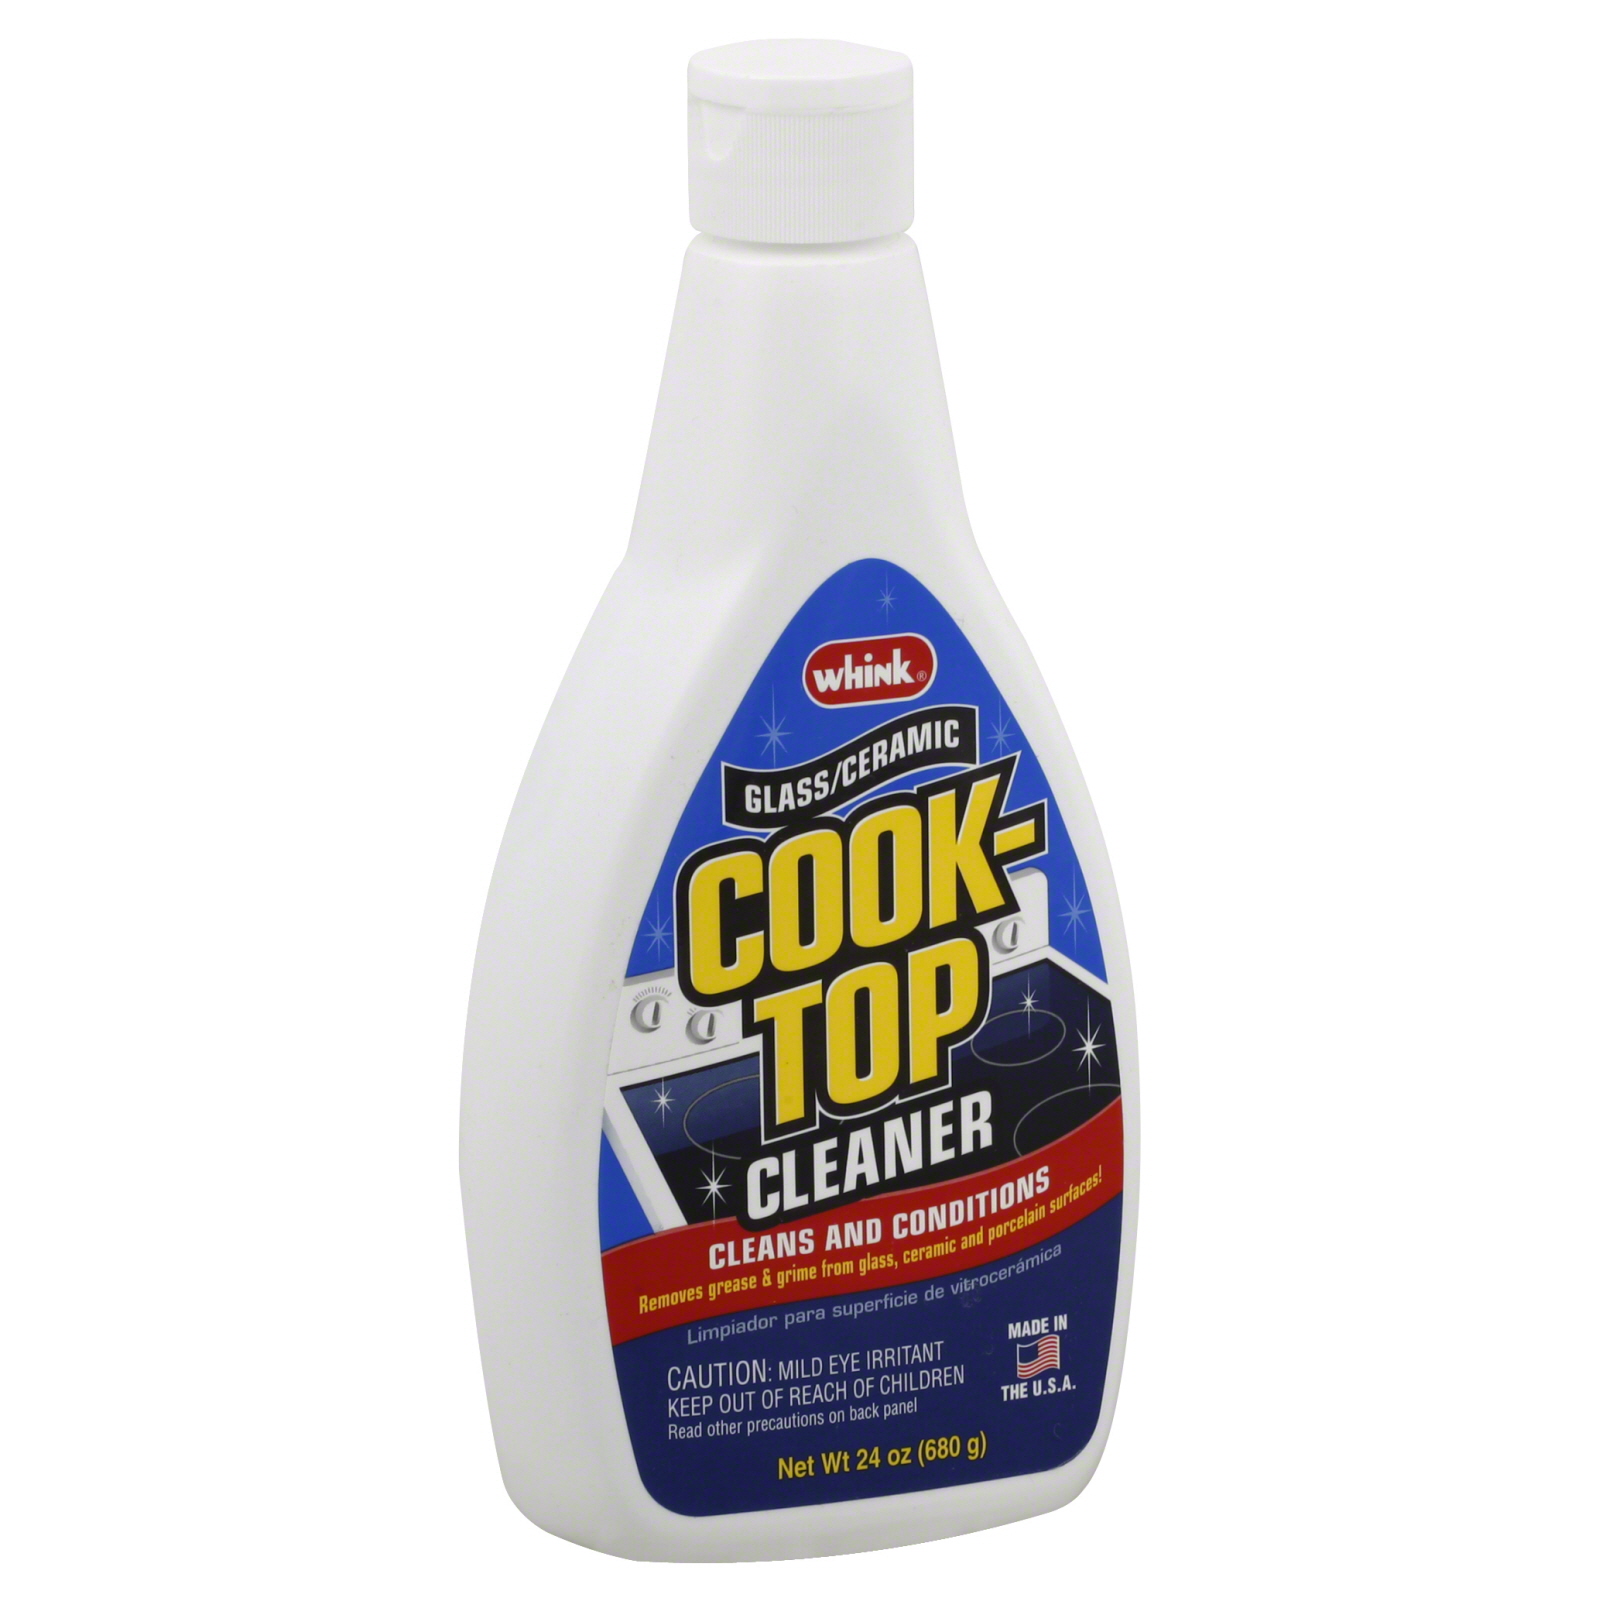 Whink Glass & Ceramic Cook Top Cleaner 24 oz